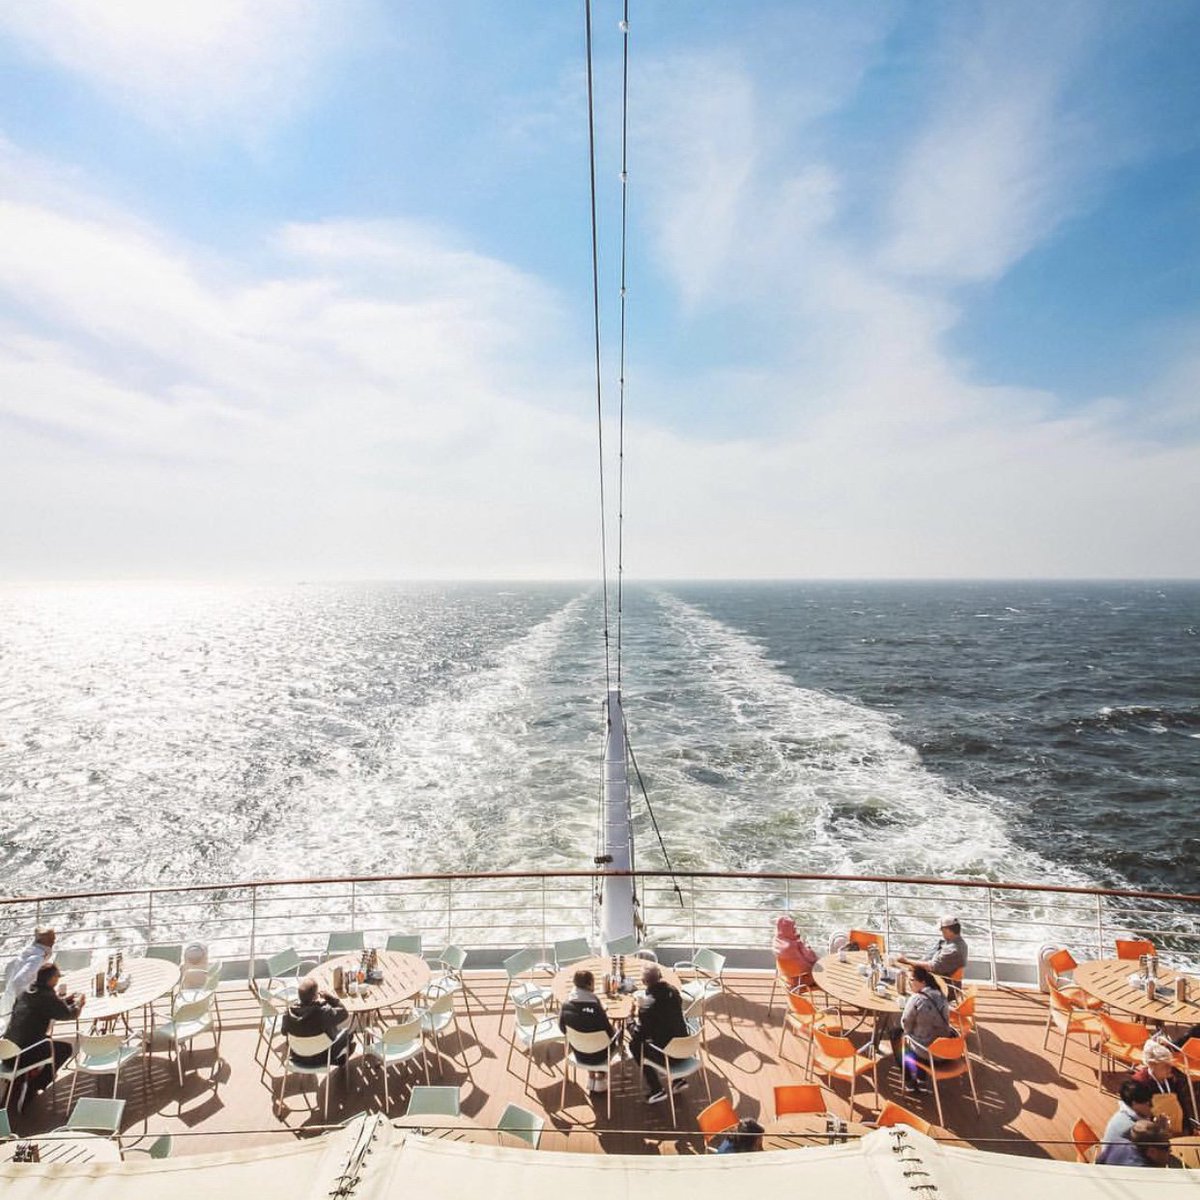 Sailing through the week without a care in the world! Have you booked a cruise recently? Where are you going? 🚢 ⚓️ 🌊 ☀️

📷 Repost: cruiseexperience on IG

#familycruise #cruiselife🚢 #cruiselover